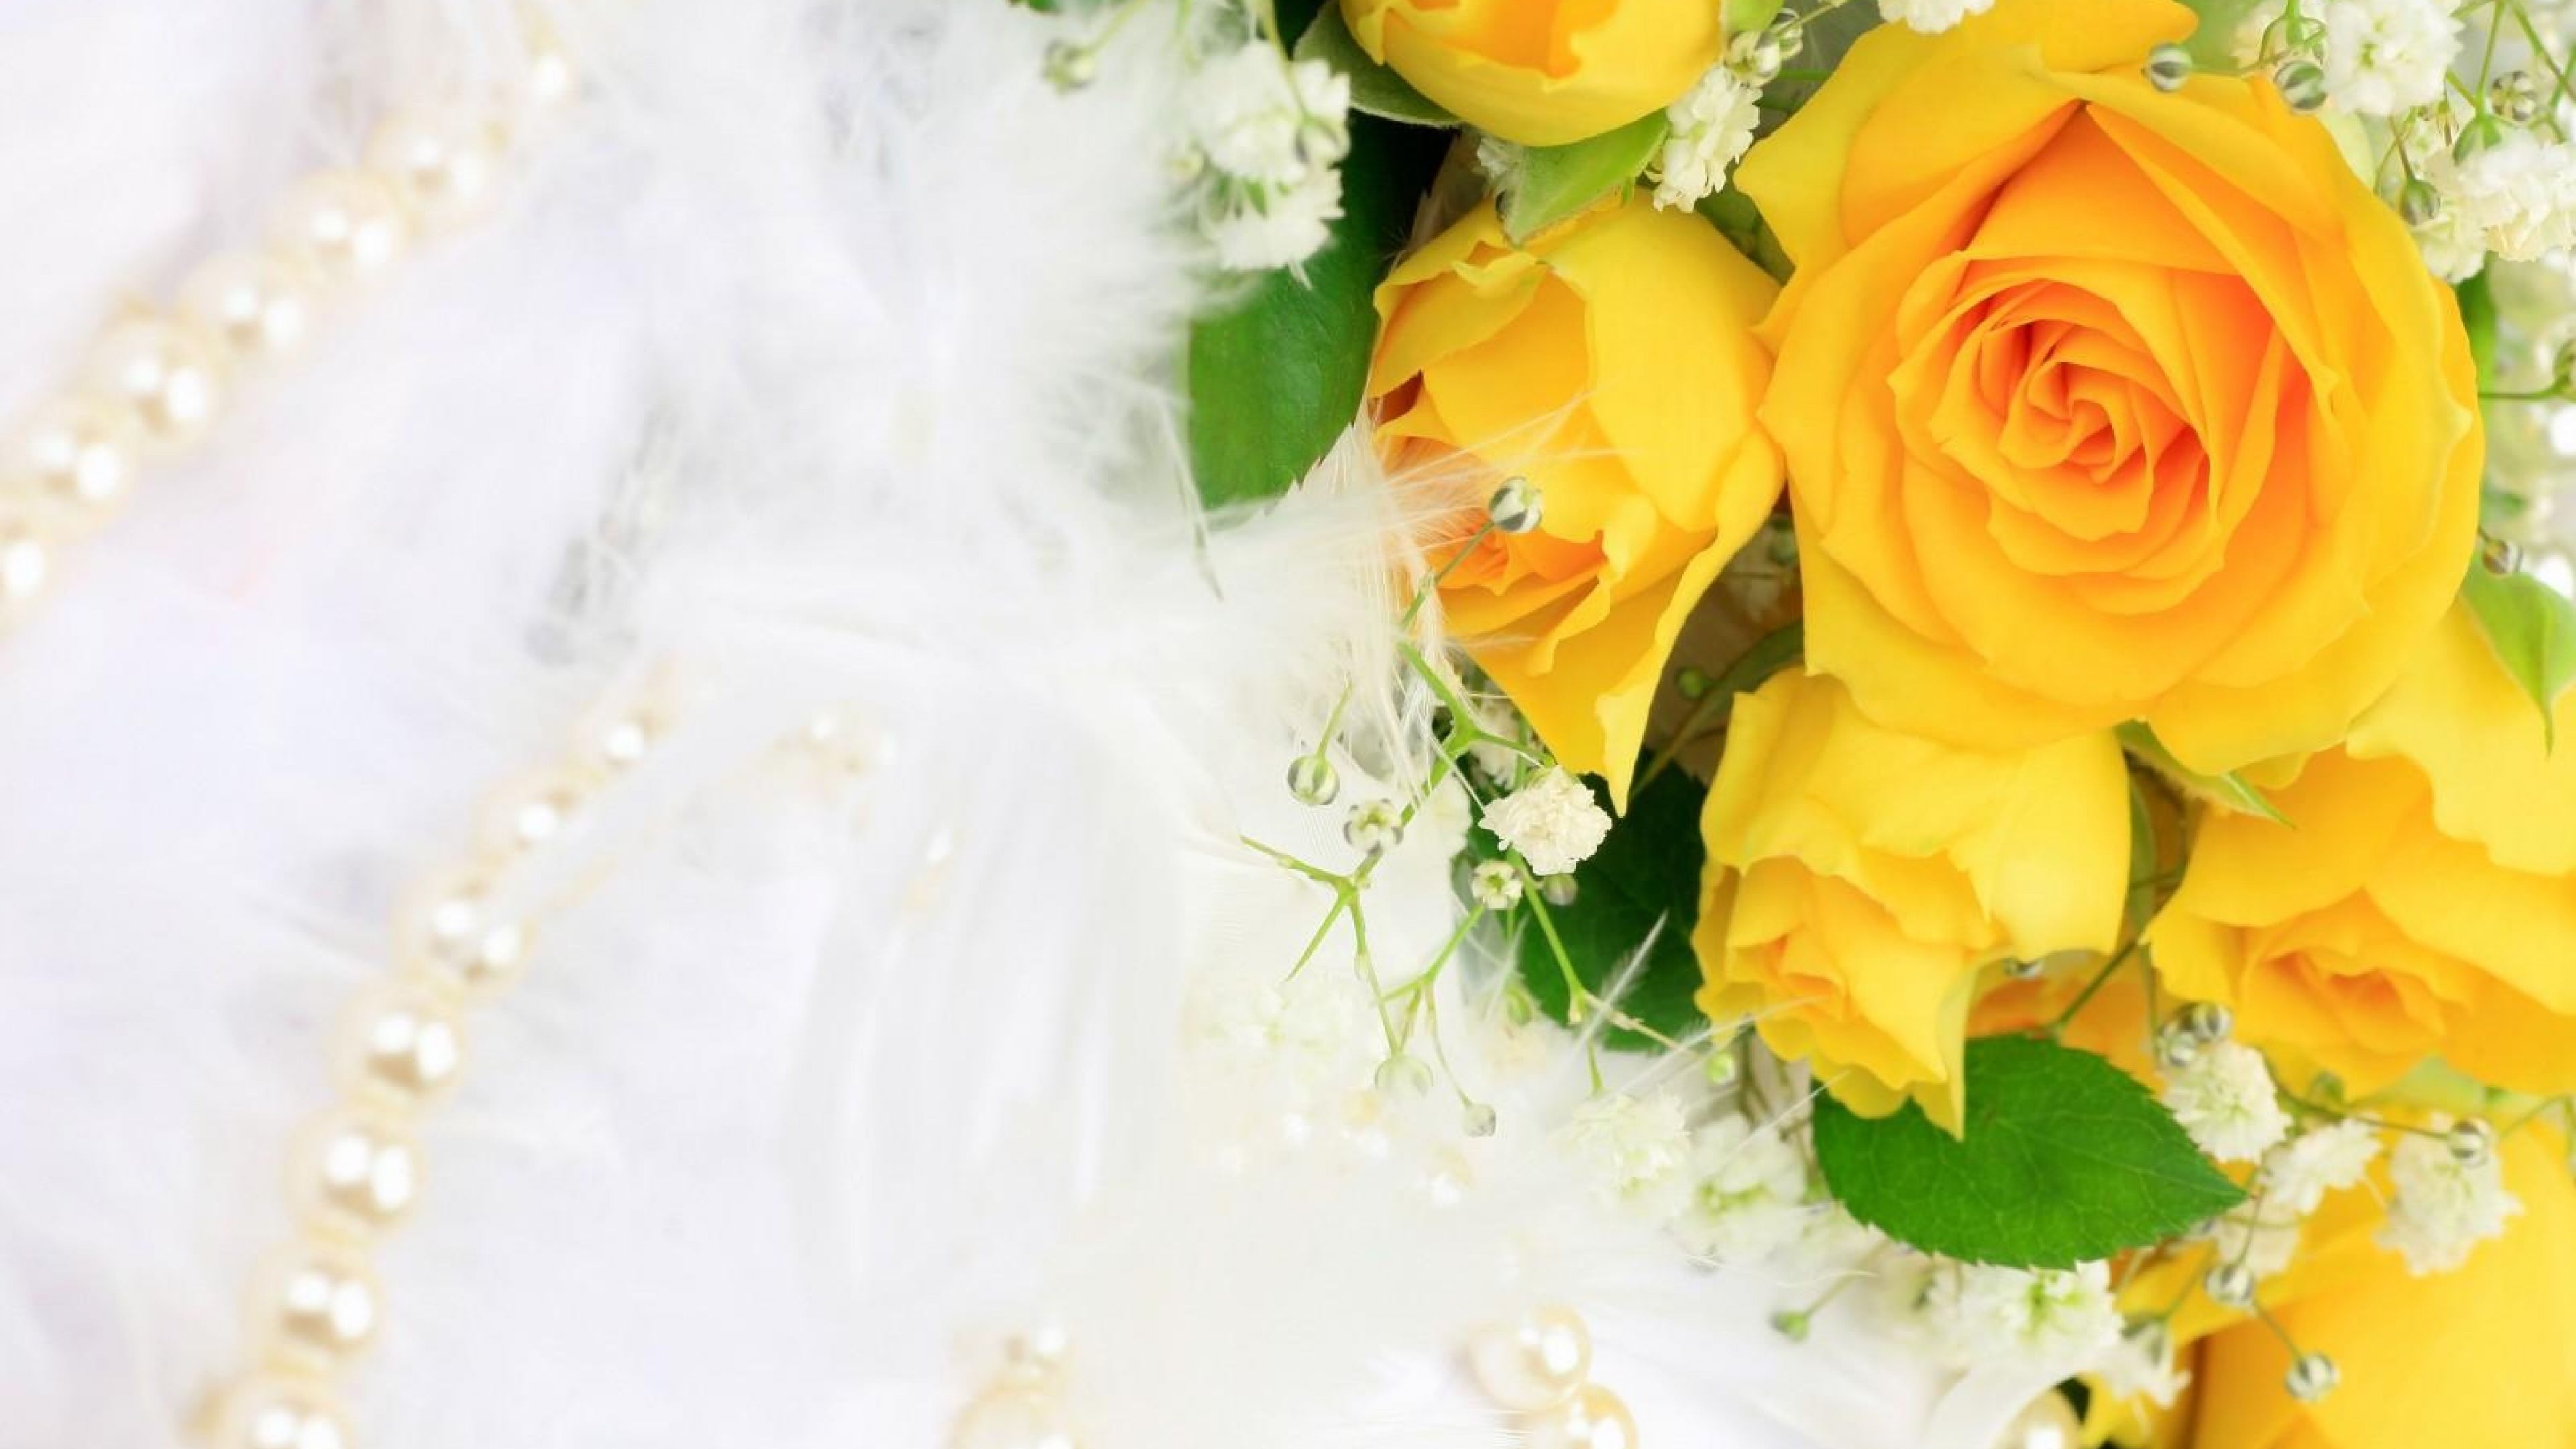 Download Wallpaper 3840x2160 Roses, Flowers, Flower, Yellow ...